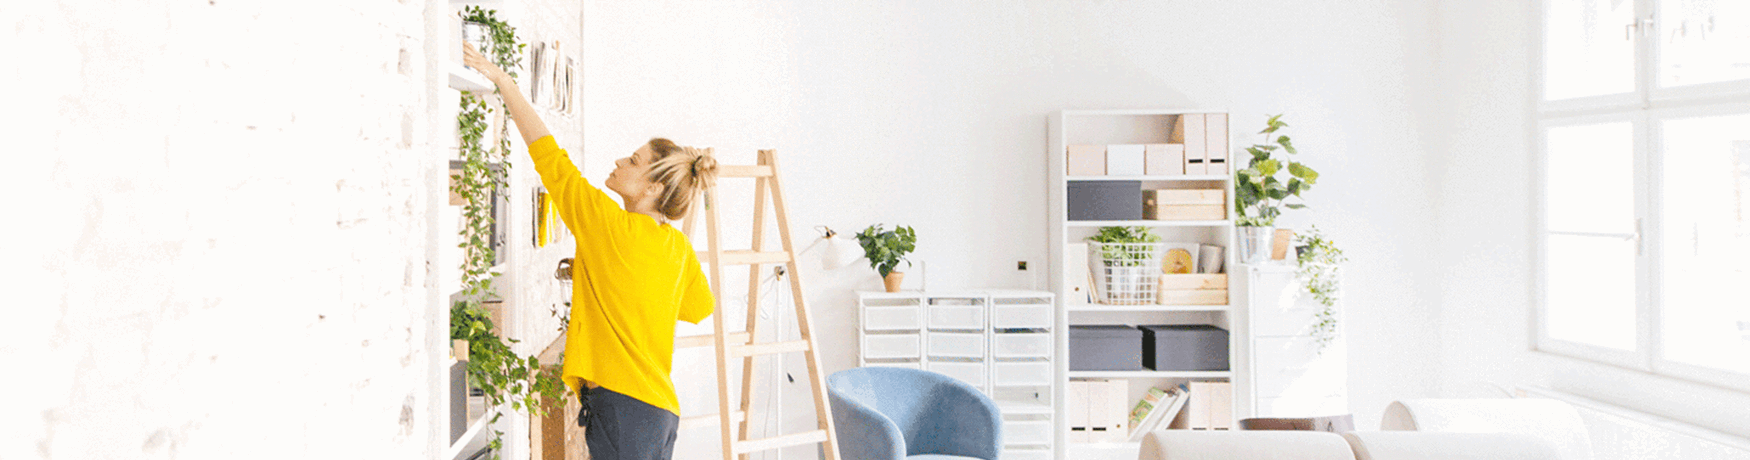 Young woman wearing a yellow jumper arranging plants on a shelf in her new home